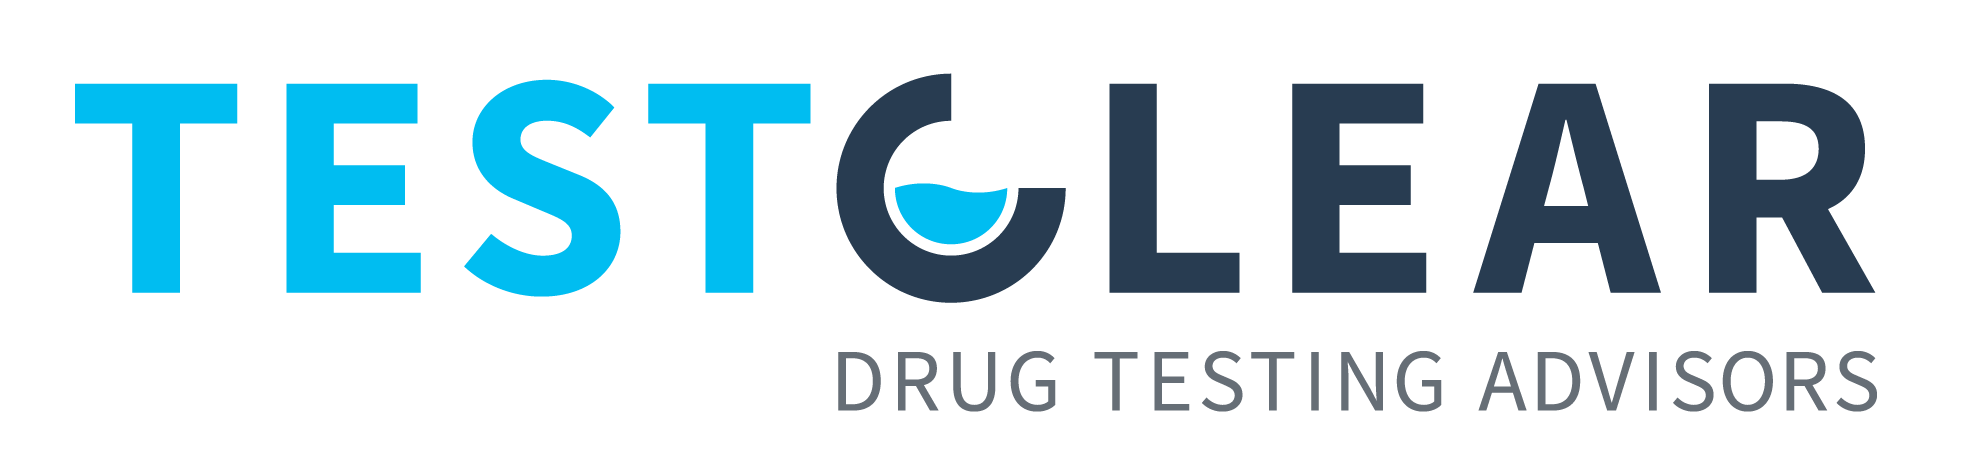 Testclear's Coupon Code and Deals